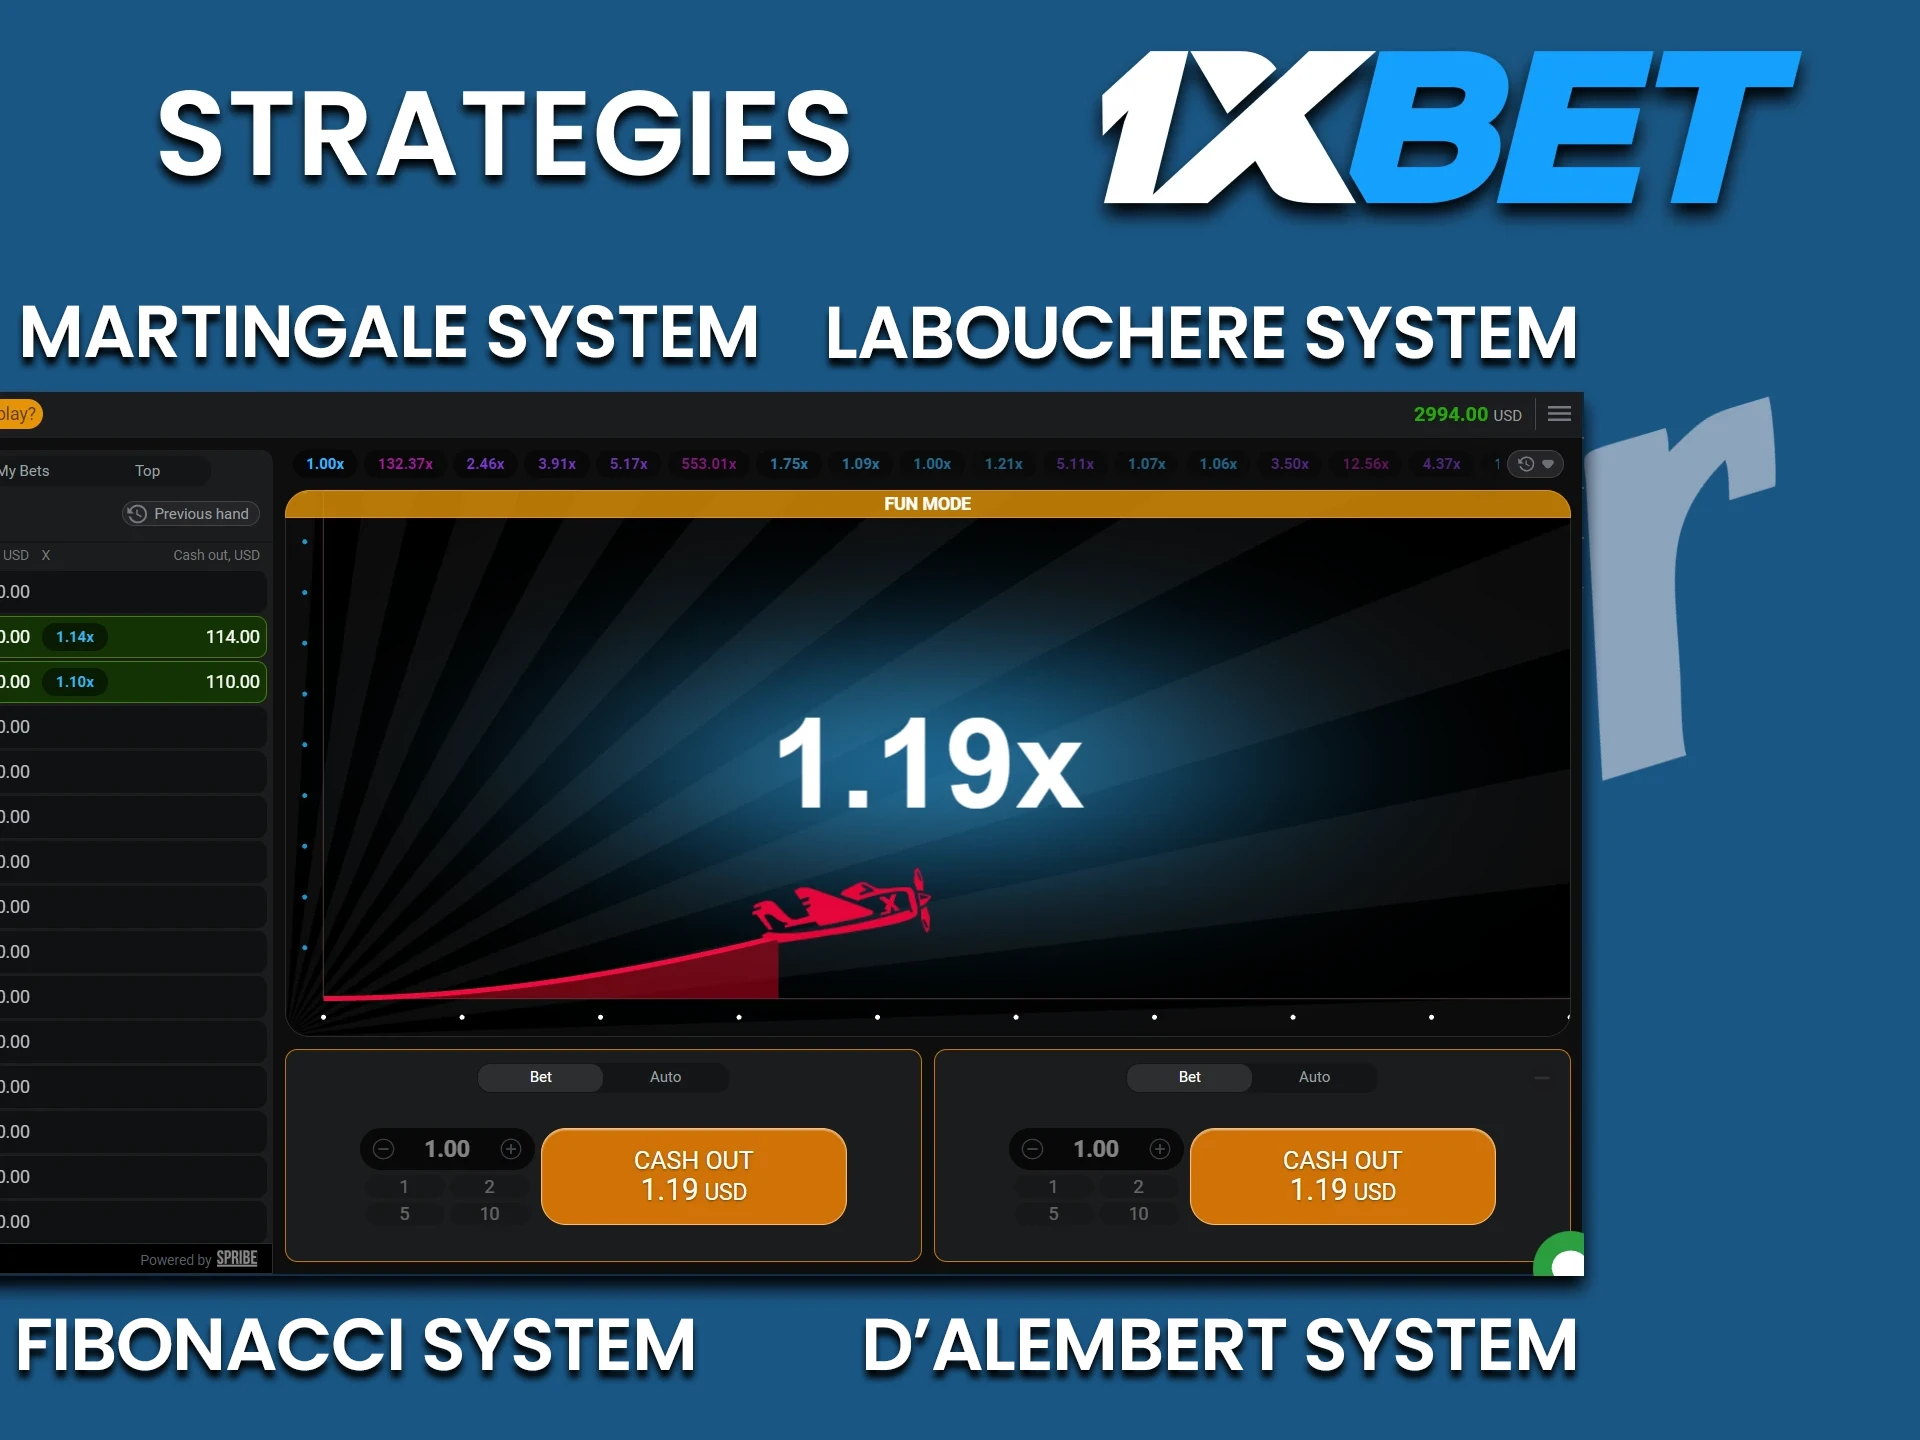 There are many strategies for winning Aviator on 1xbet.